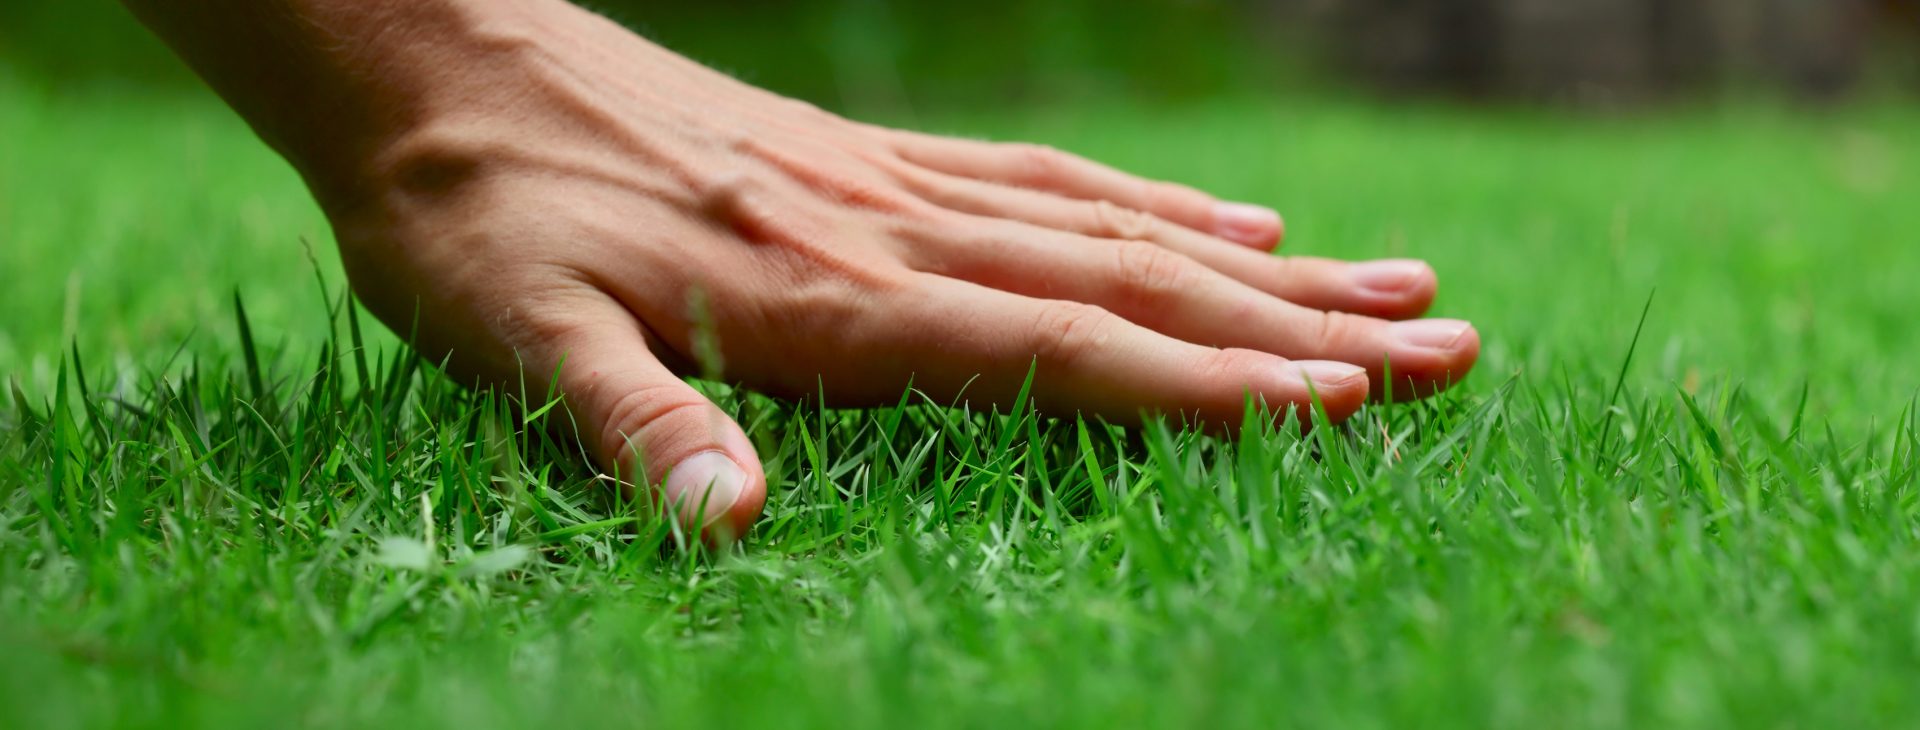 Your lawn and landscape
the way that it should be